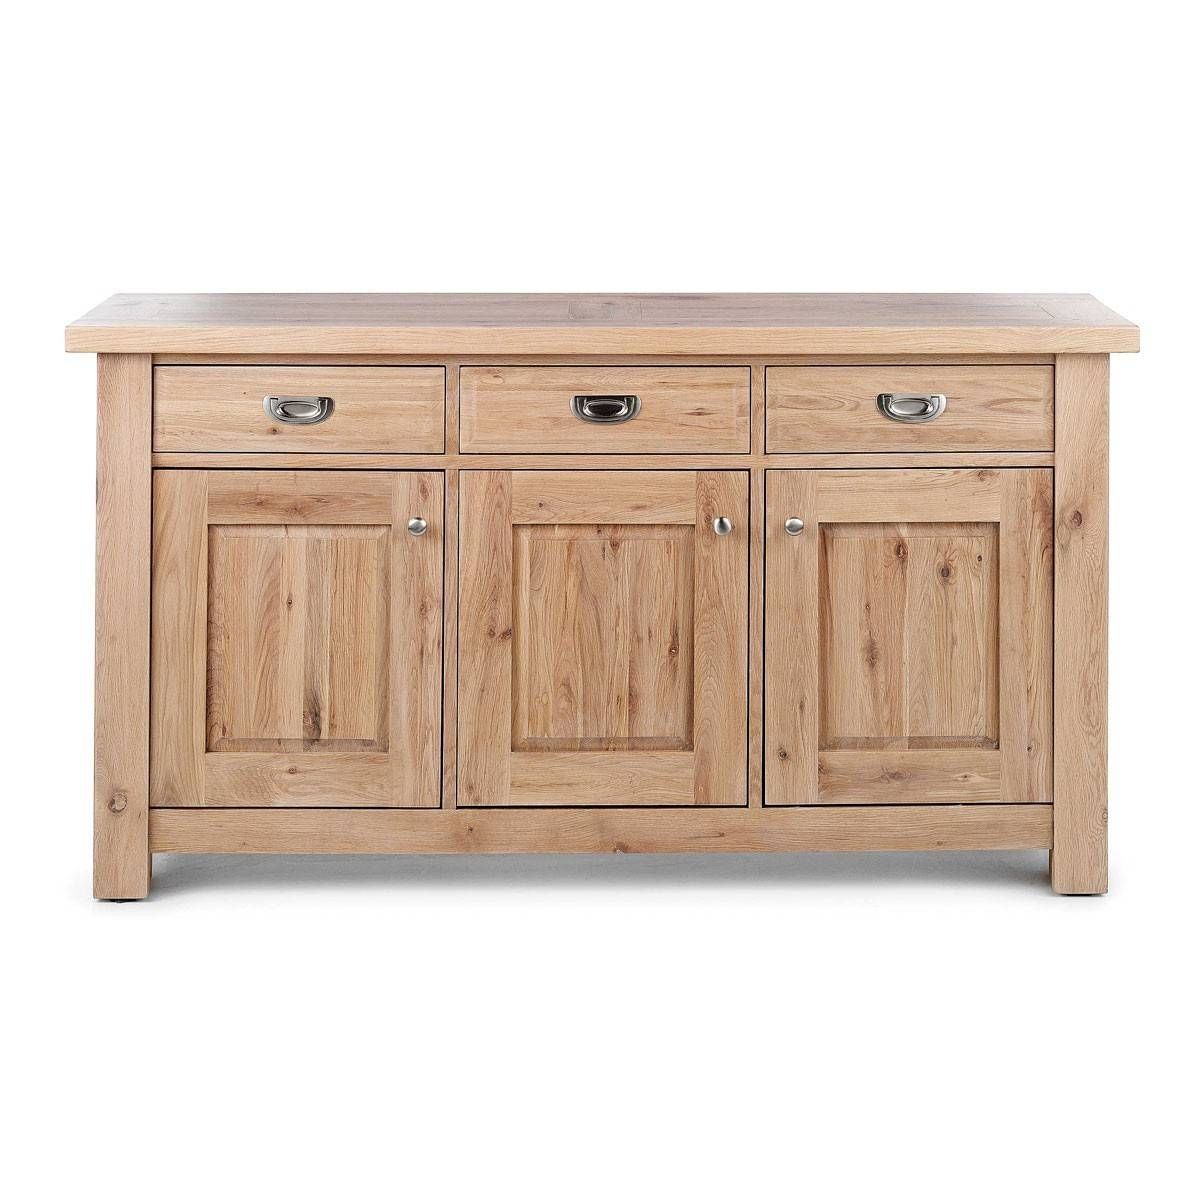 Tuscany Contemporary Wide Oak Sideboard | Contemporary Dining Room With Regard To Tuscany Sideboards (View 7 of 30)